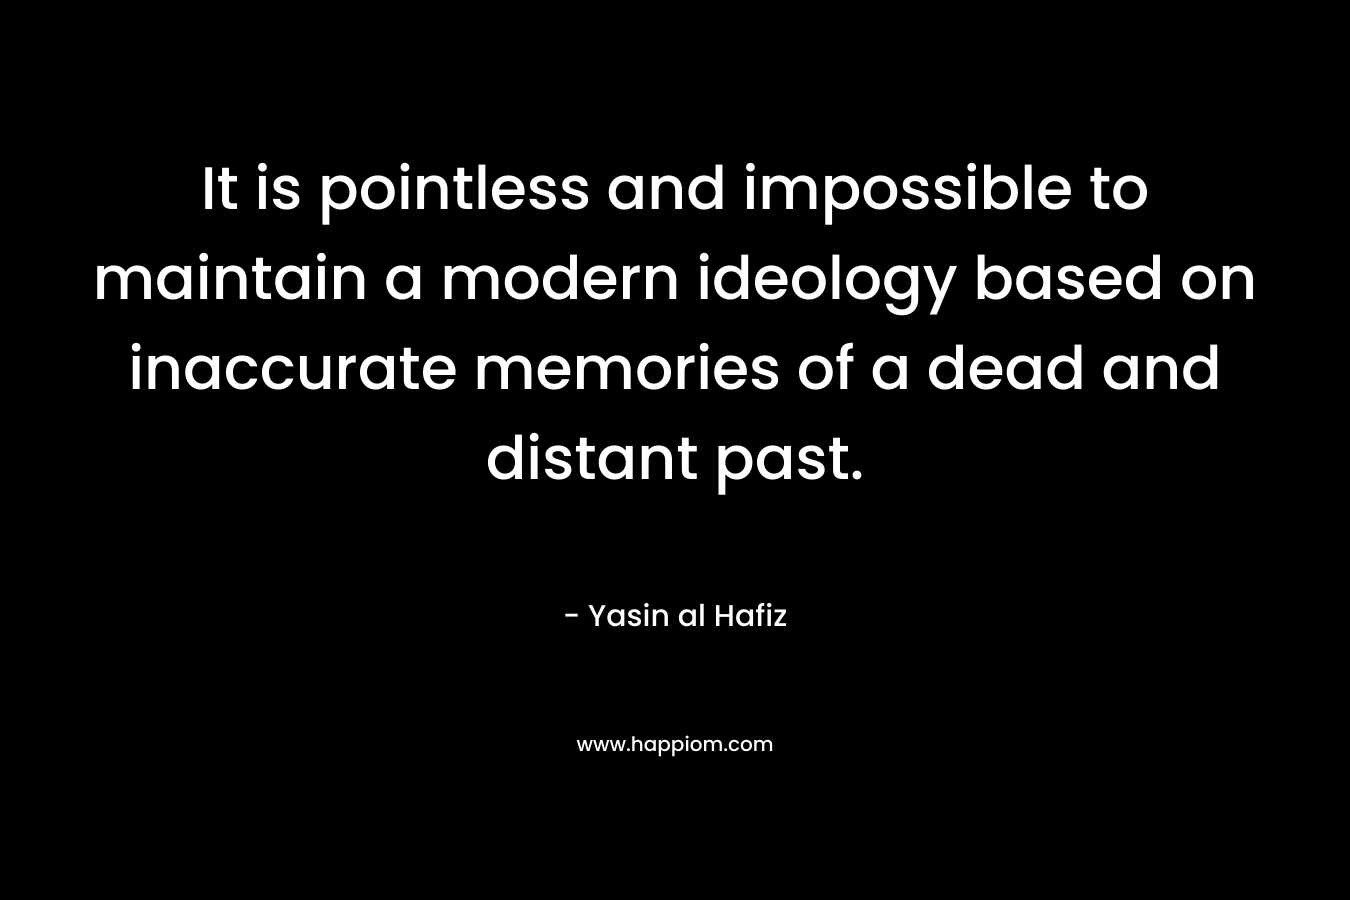 It is pointless and impossible to maintain a modern ideology based on inaccurate memories of a dead and distant past.